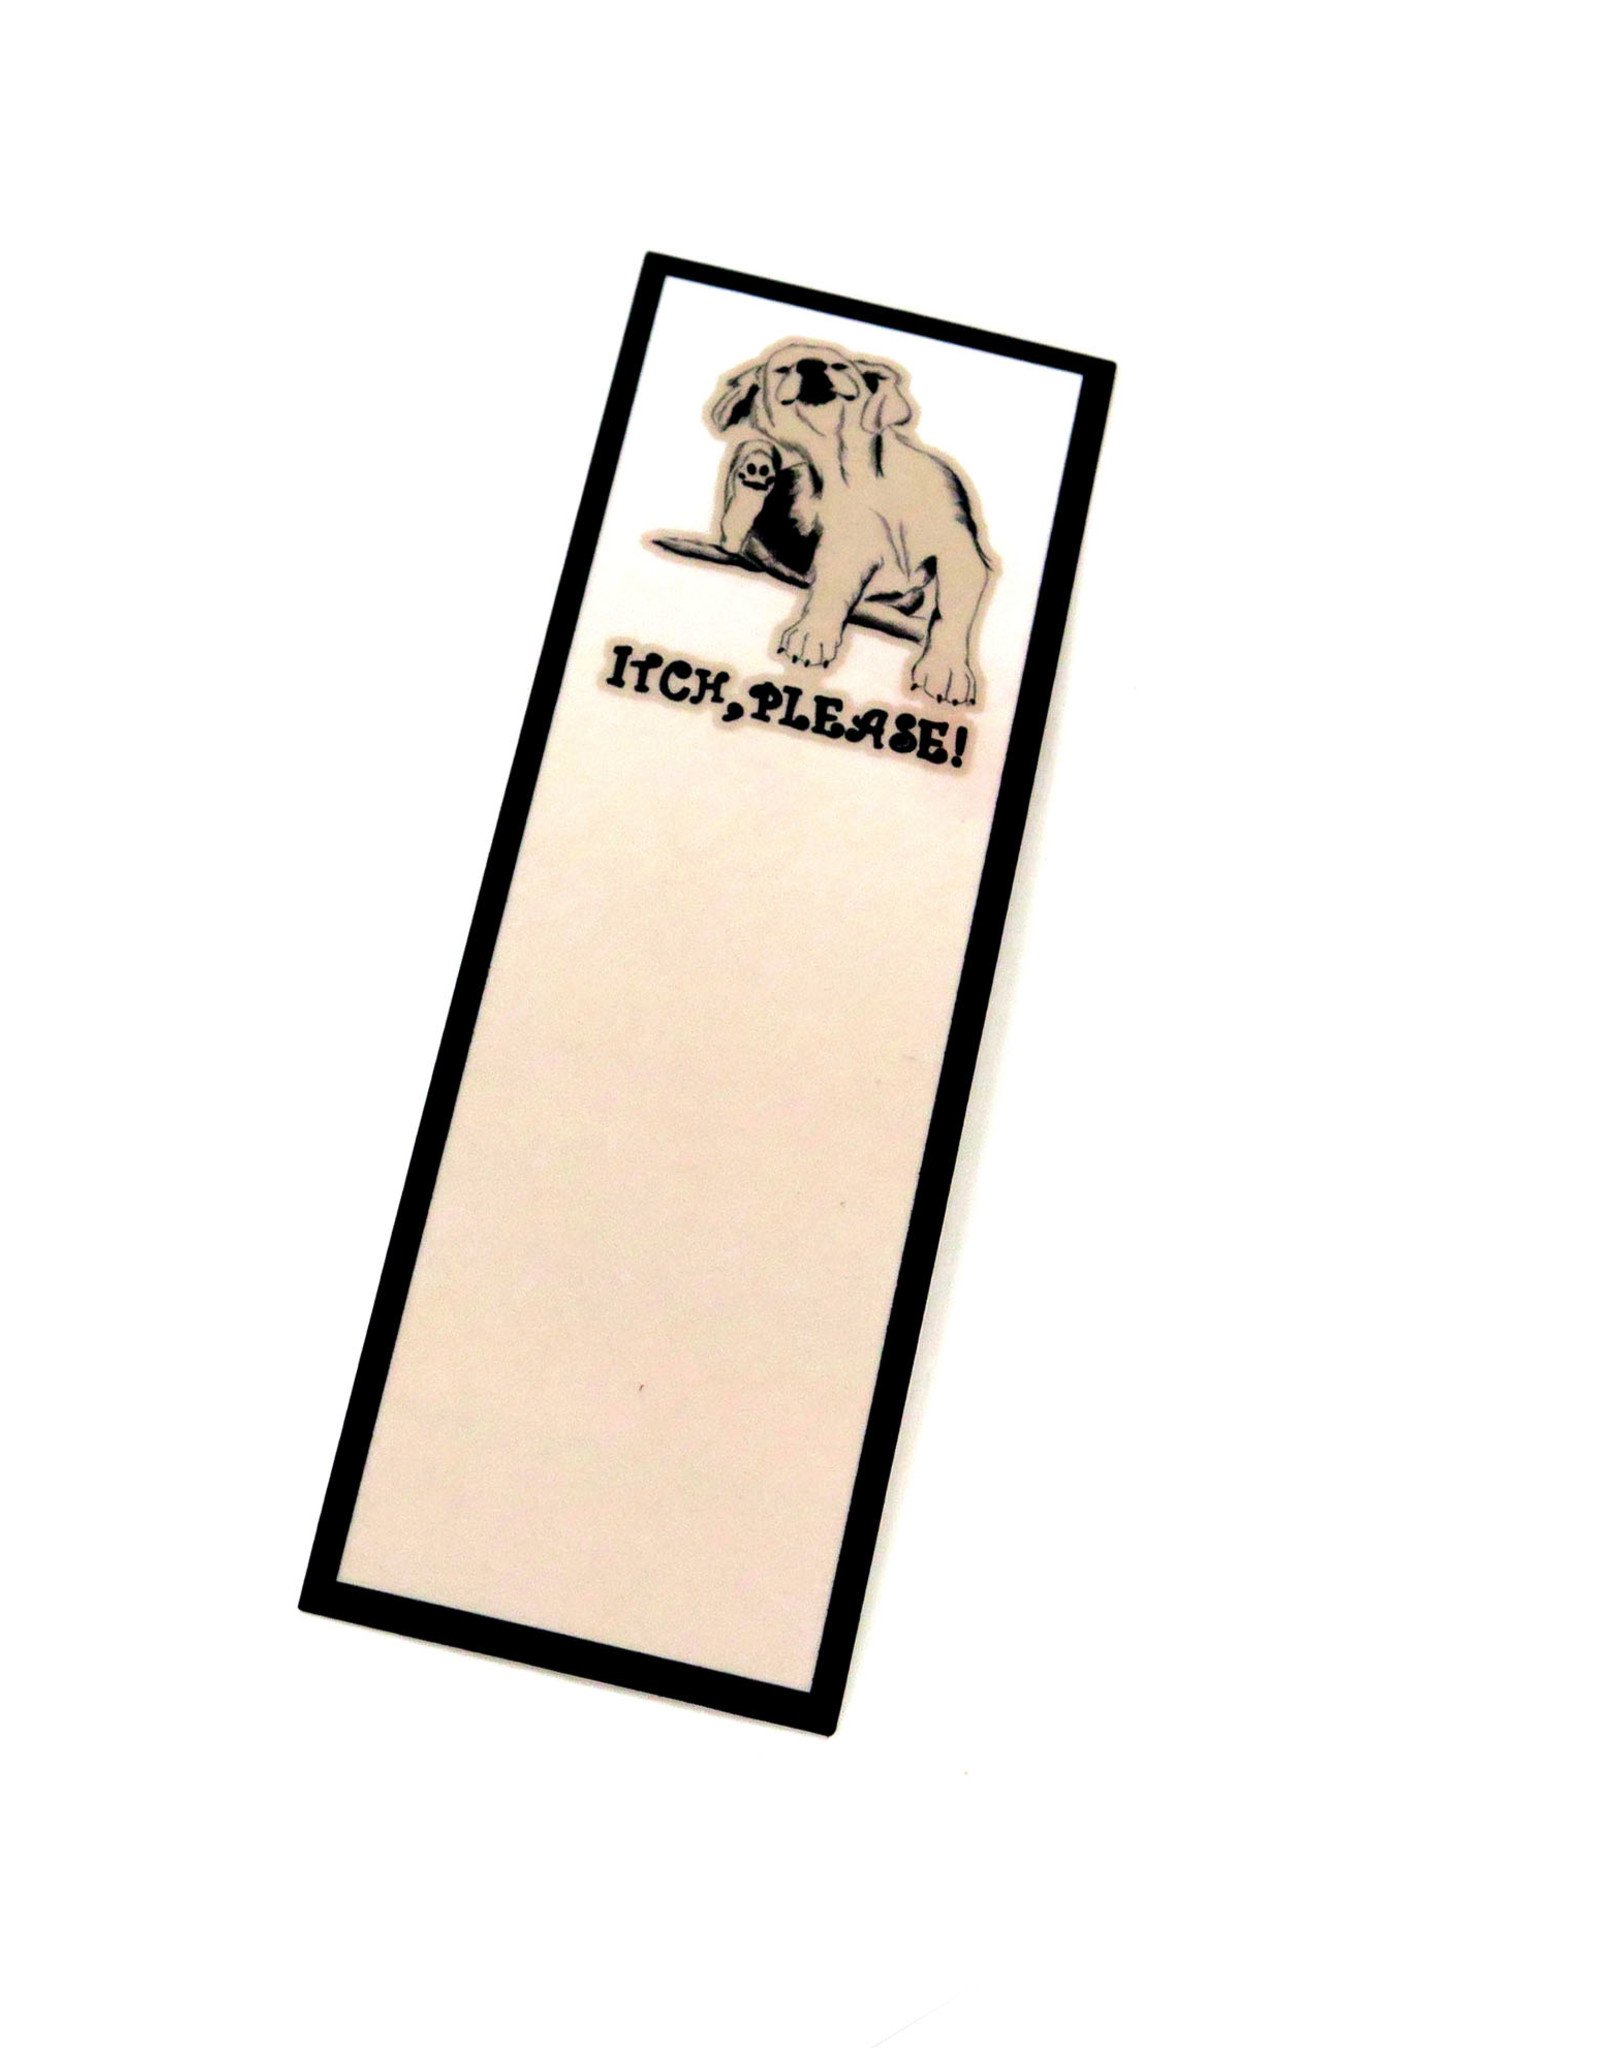 All4Pun "Itch Please" Bookmark by Scott Dickens, All4Pun